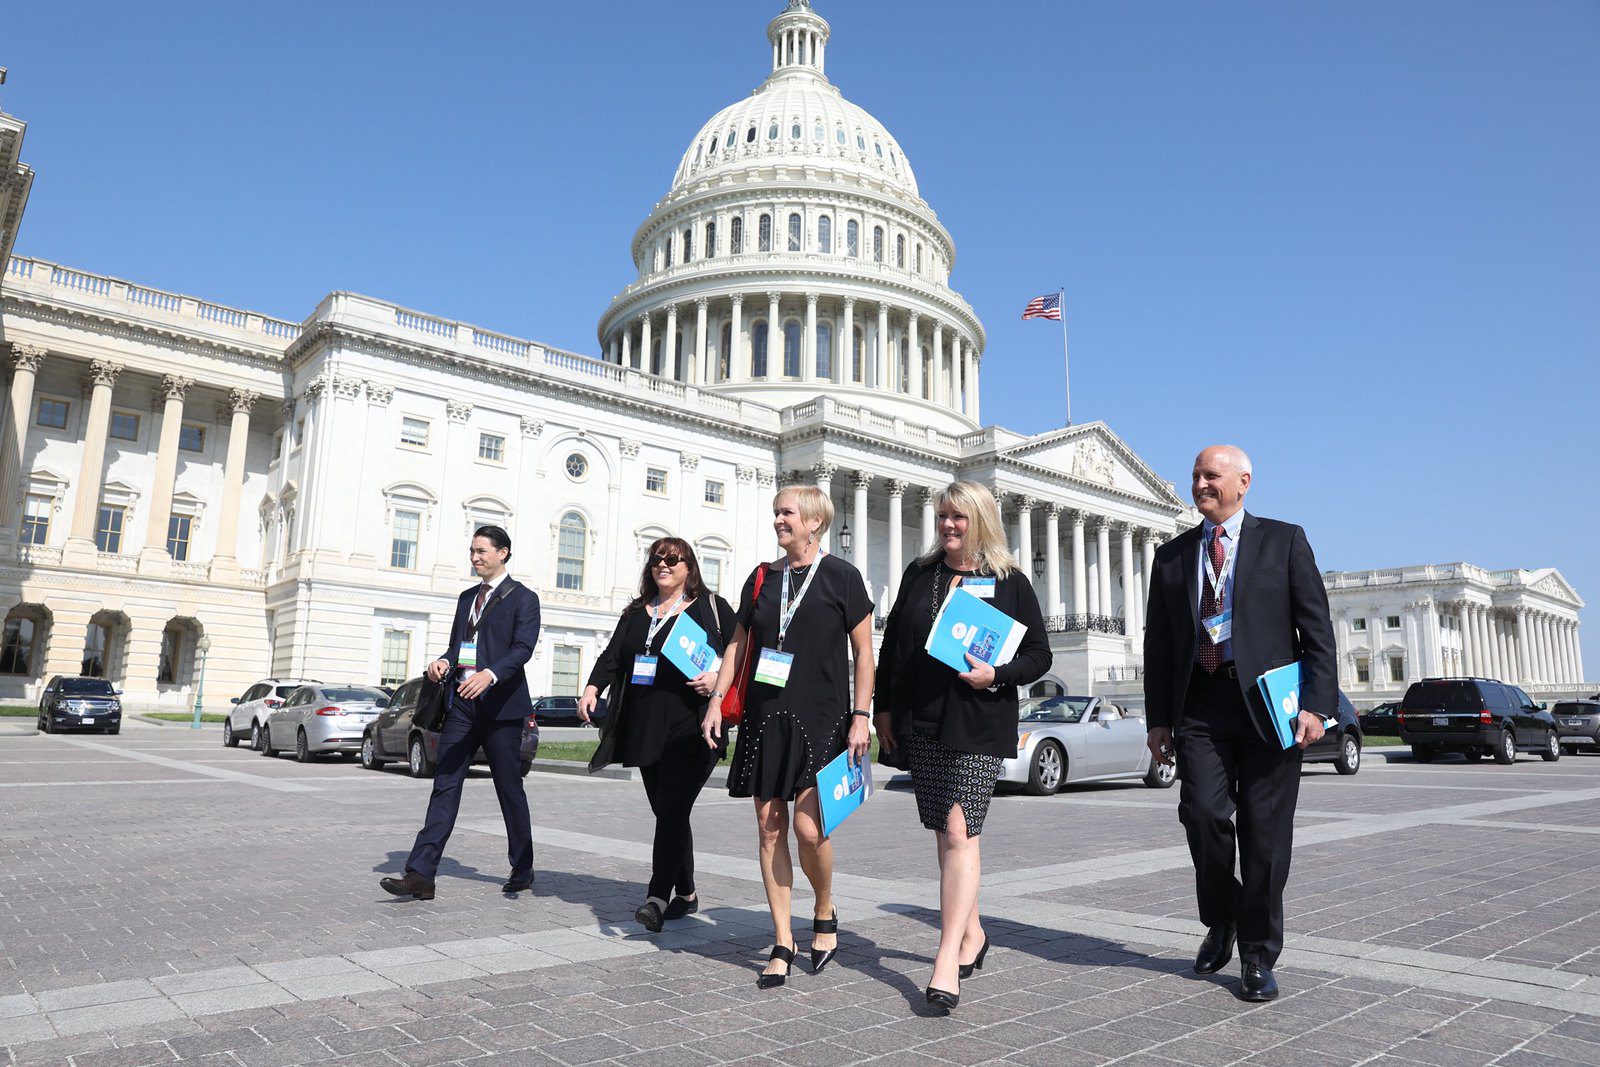 Travel advisors went to Capitol Hill on May 8, 2018, to lobby congressional representatives.